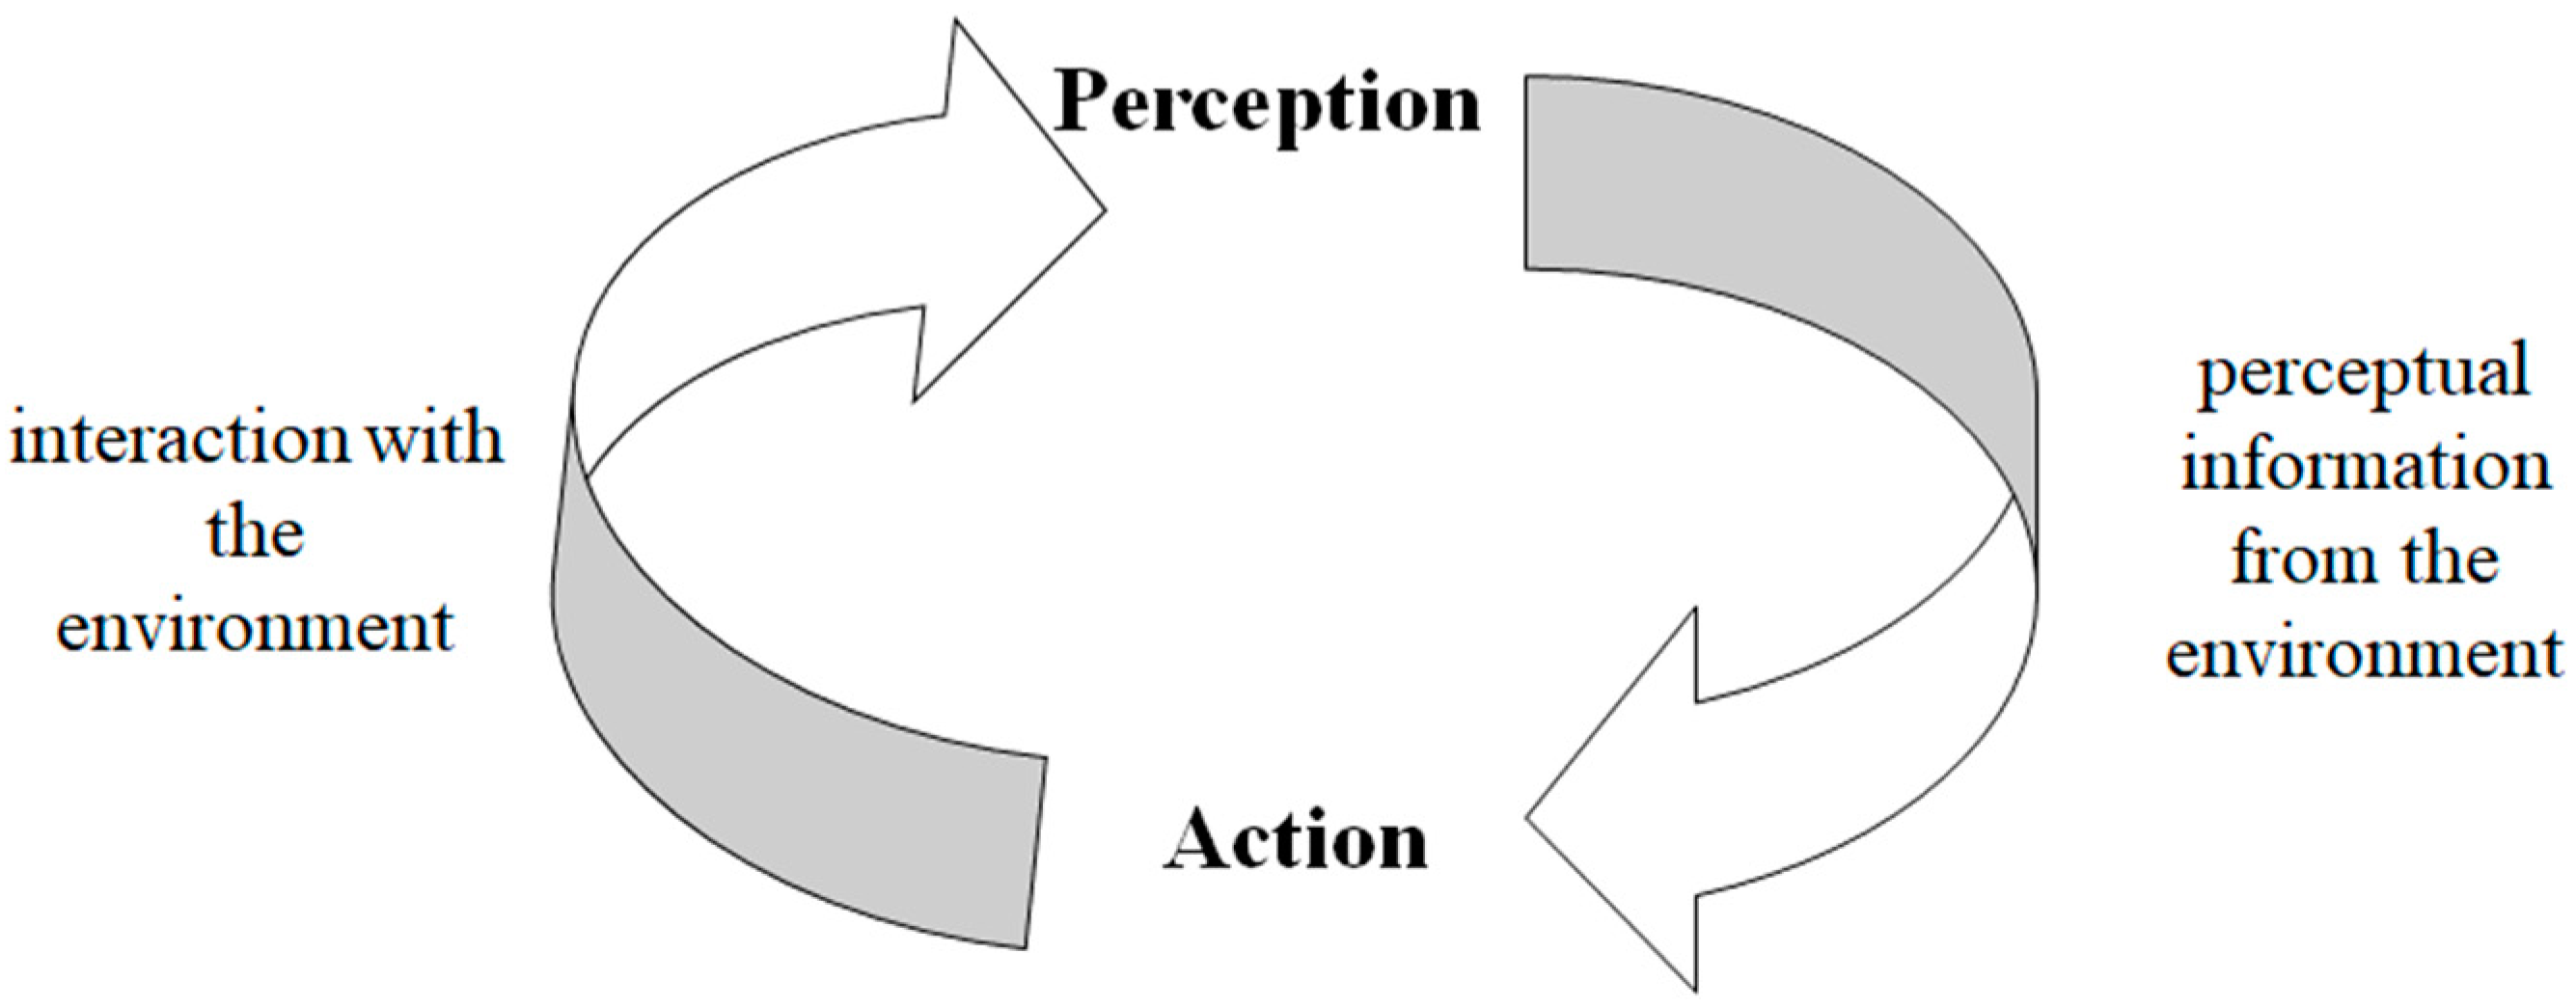 A diagram with an arrow pointing both ways best describes the relationship between perception and action. This chart shows data provided in the figure caption